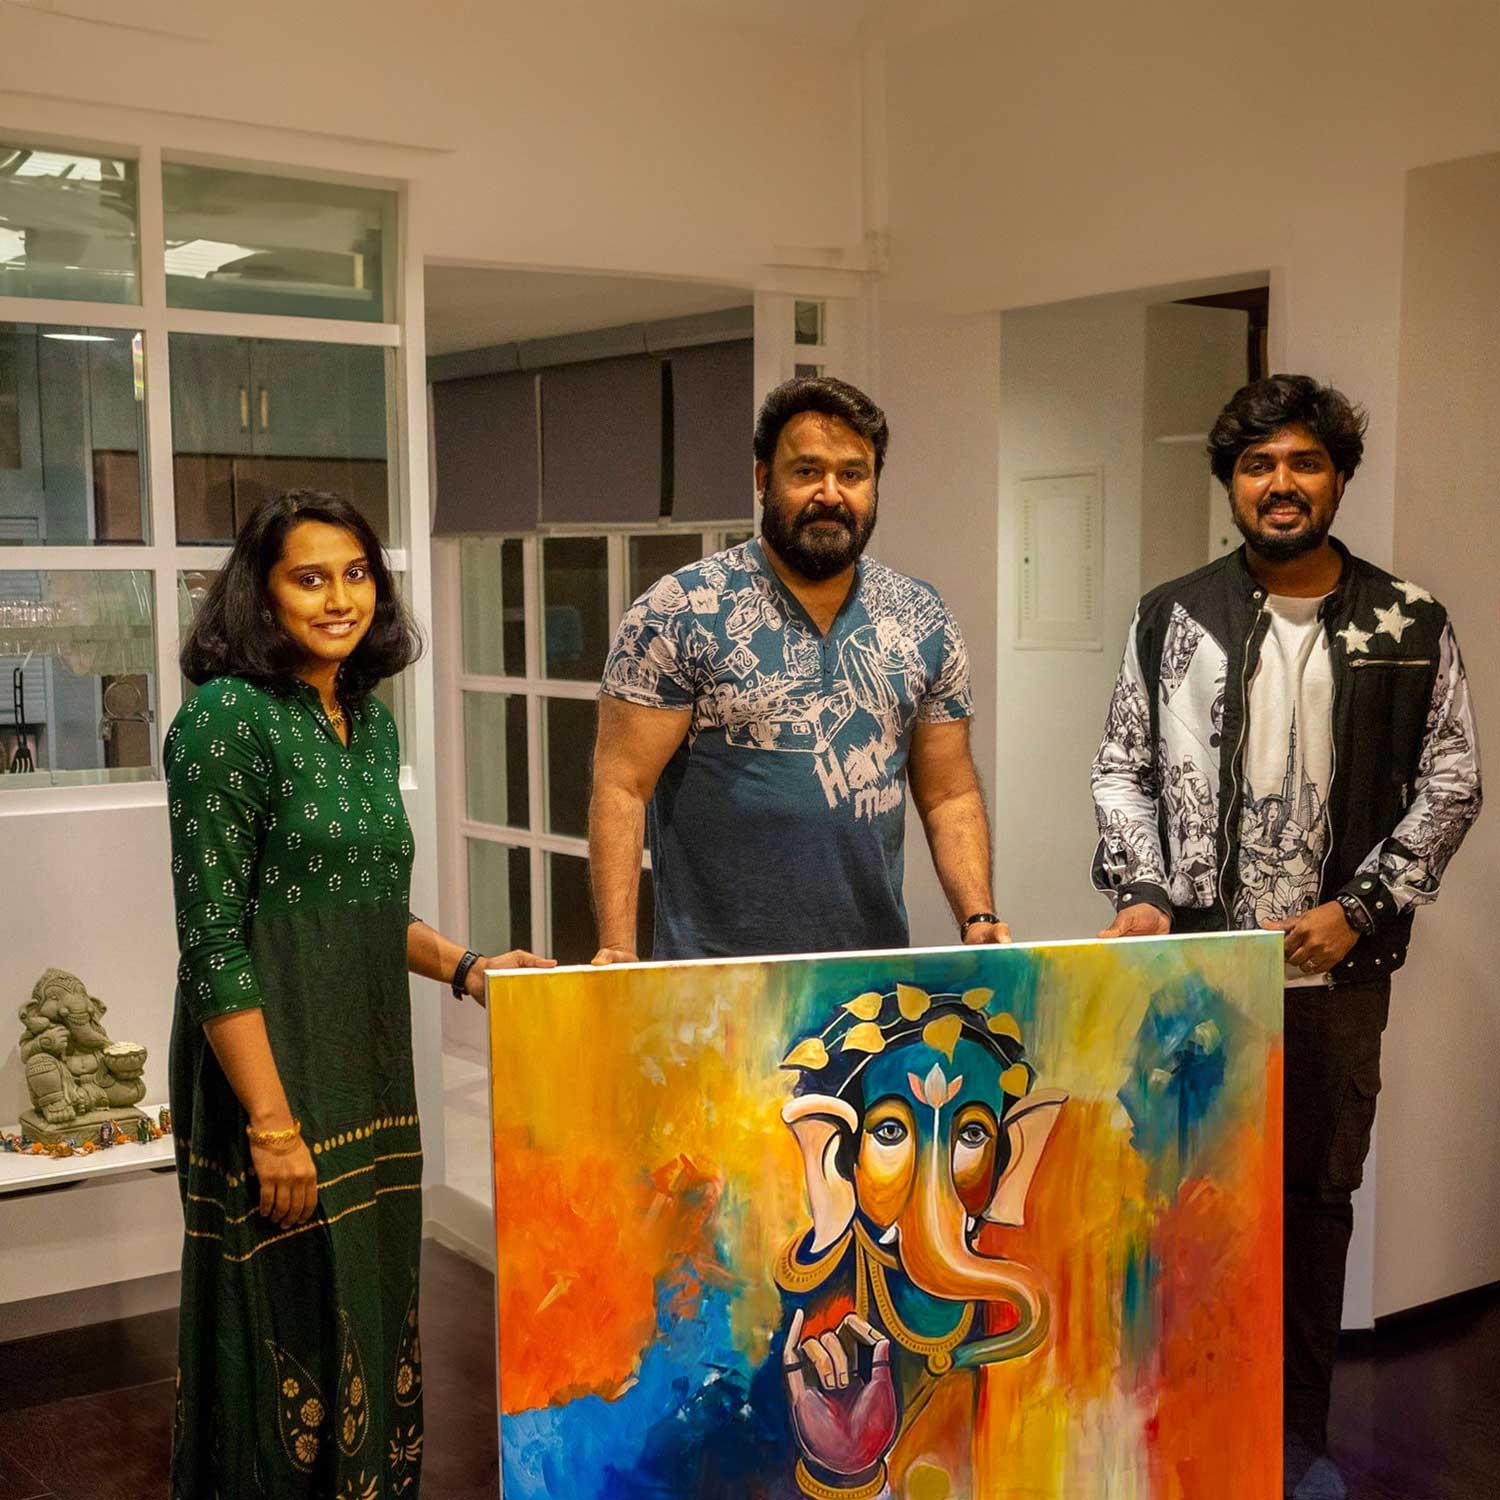 Renowned artist Sijin Gopinathan recently gifted actor Mohanlal with a special artwork, a Ganesha painting